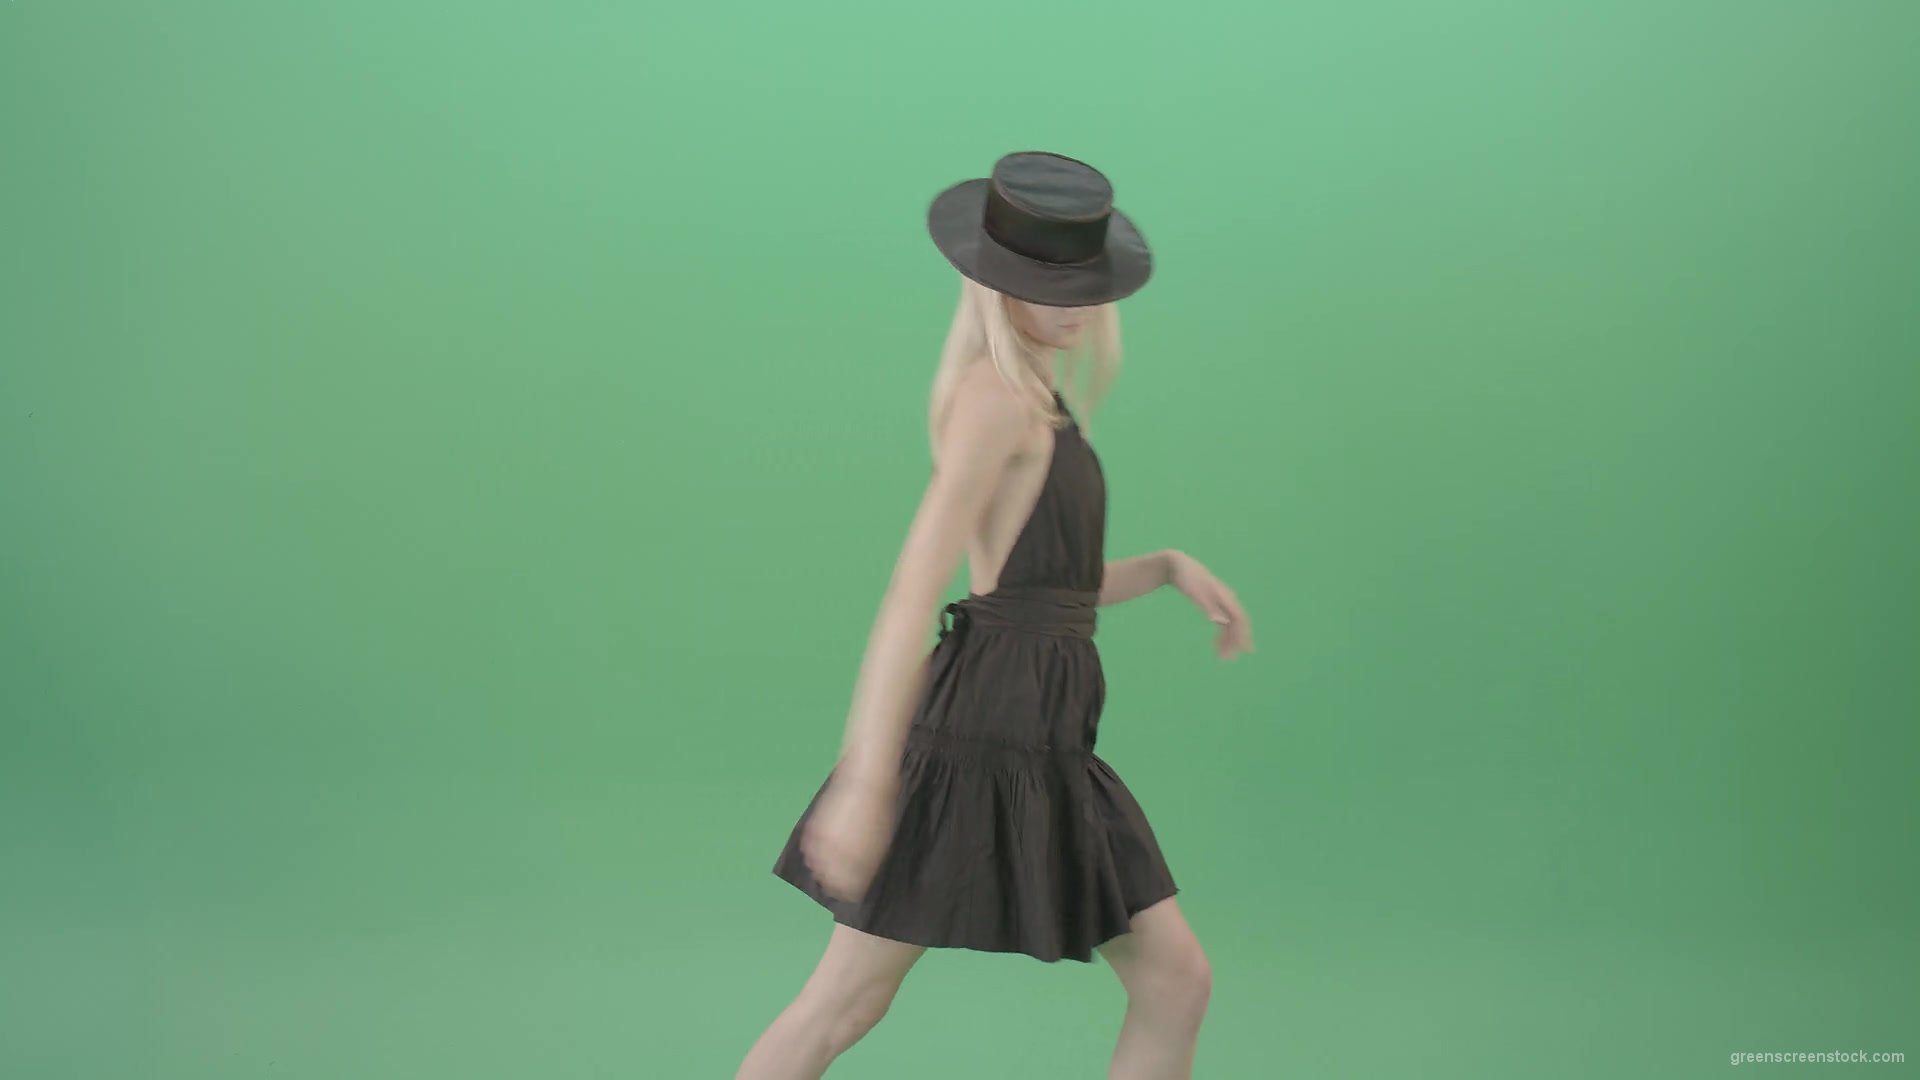 Video-Art-Fashion-Dance-by-Girl-in-black-outlet-and-dark-hat-on-green-screen-Video-Footage-1920_007 Green Screen Stock